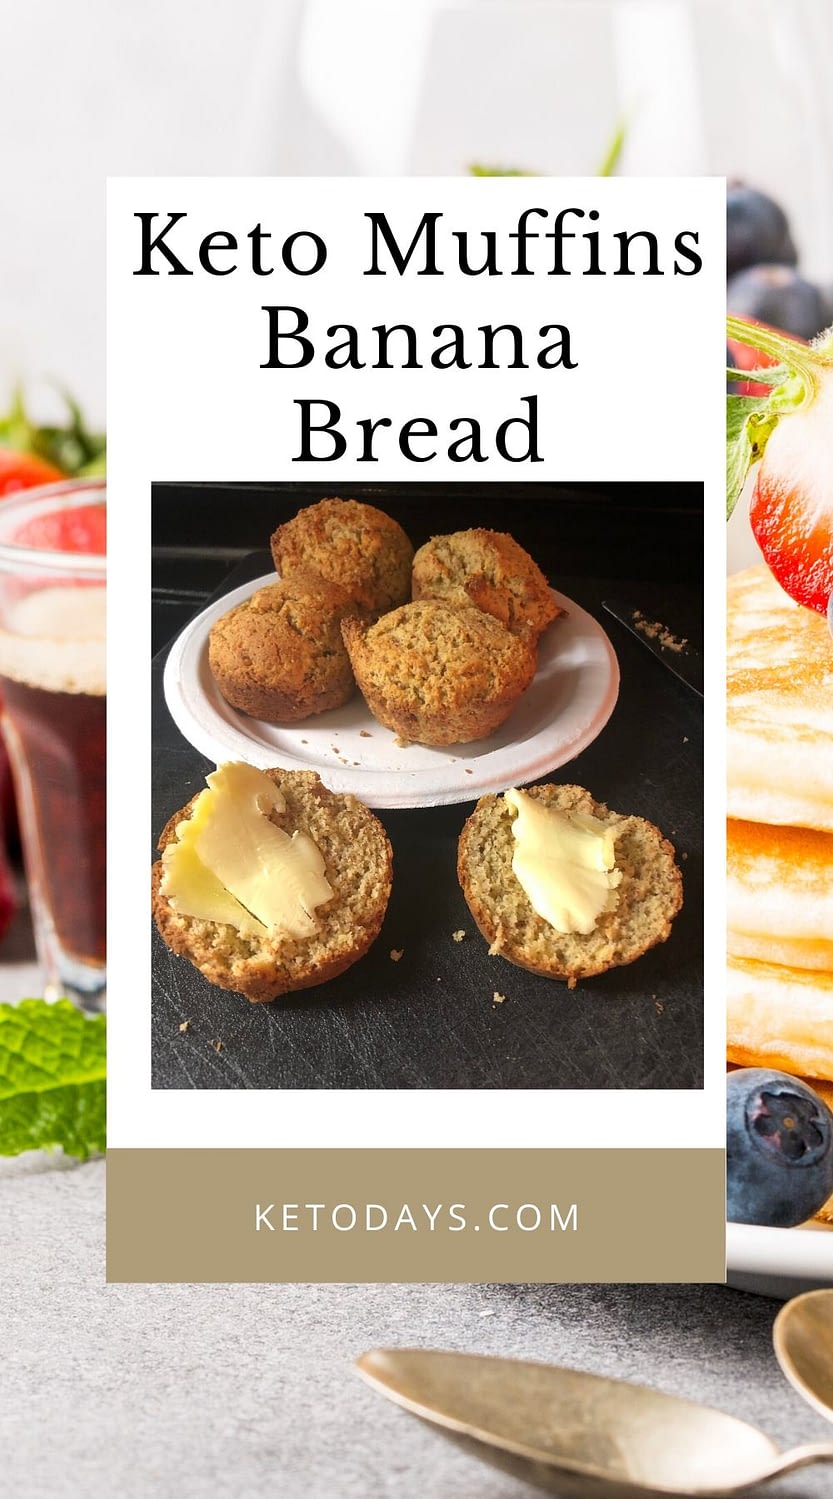 This Banana Bread Muffin Keto Recipe hits the spot! You have several options to make this keto recipe with your favorite ingredients. 